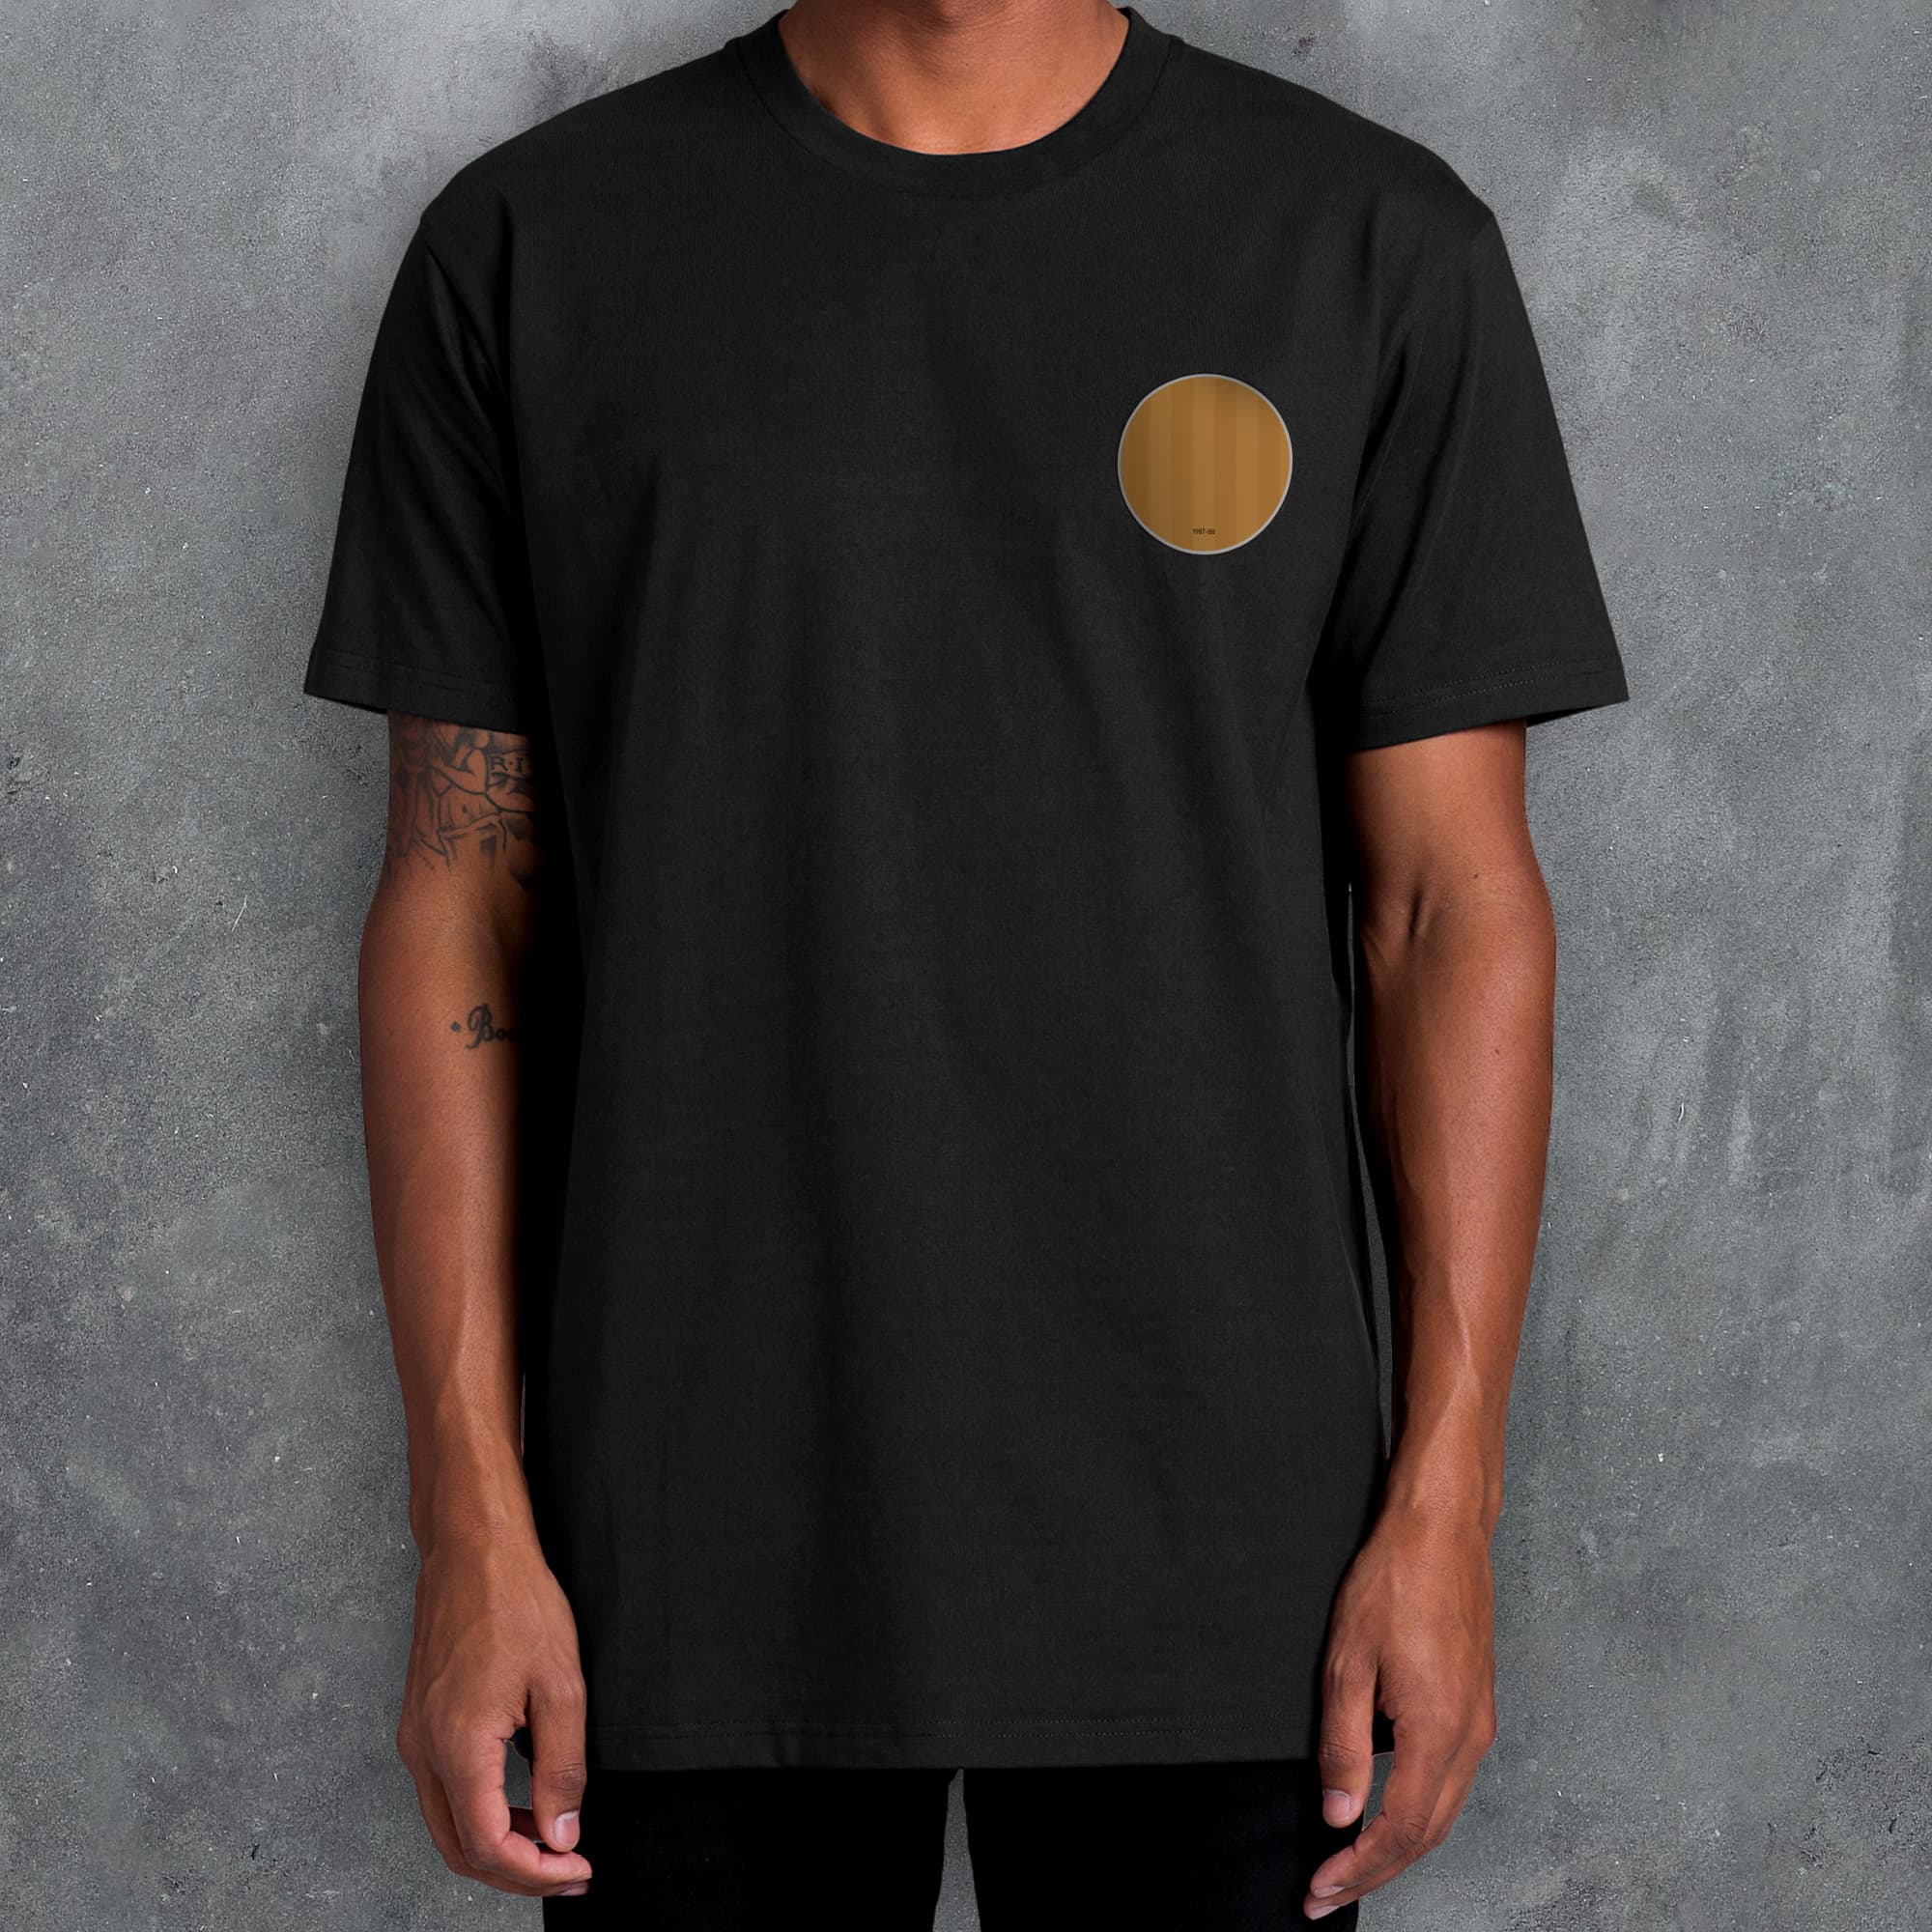 a man wearing a black t - shirt with a gold circle on it